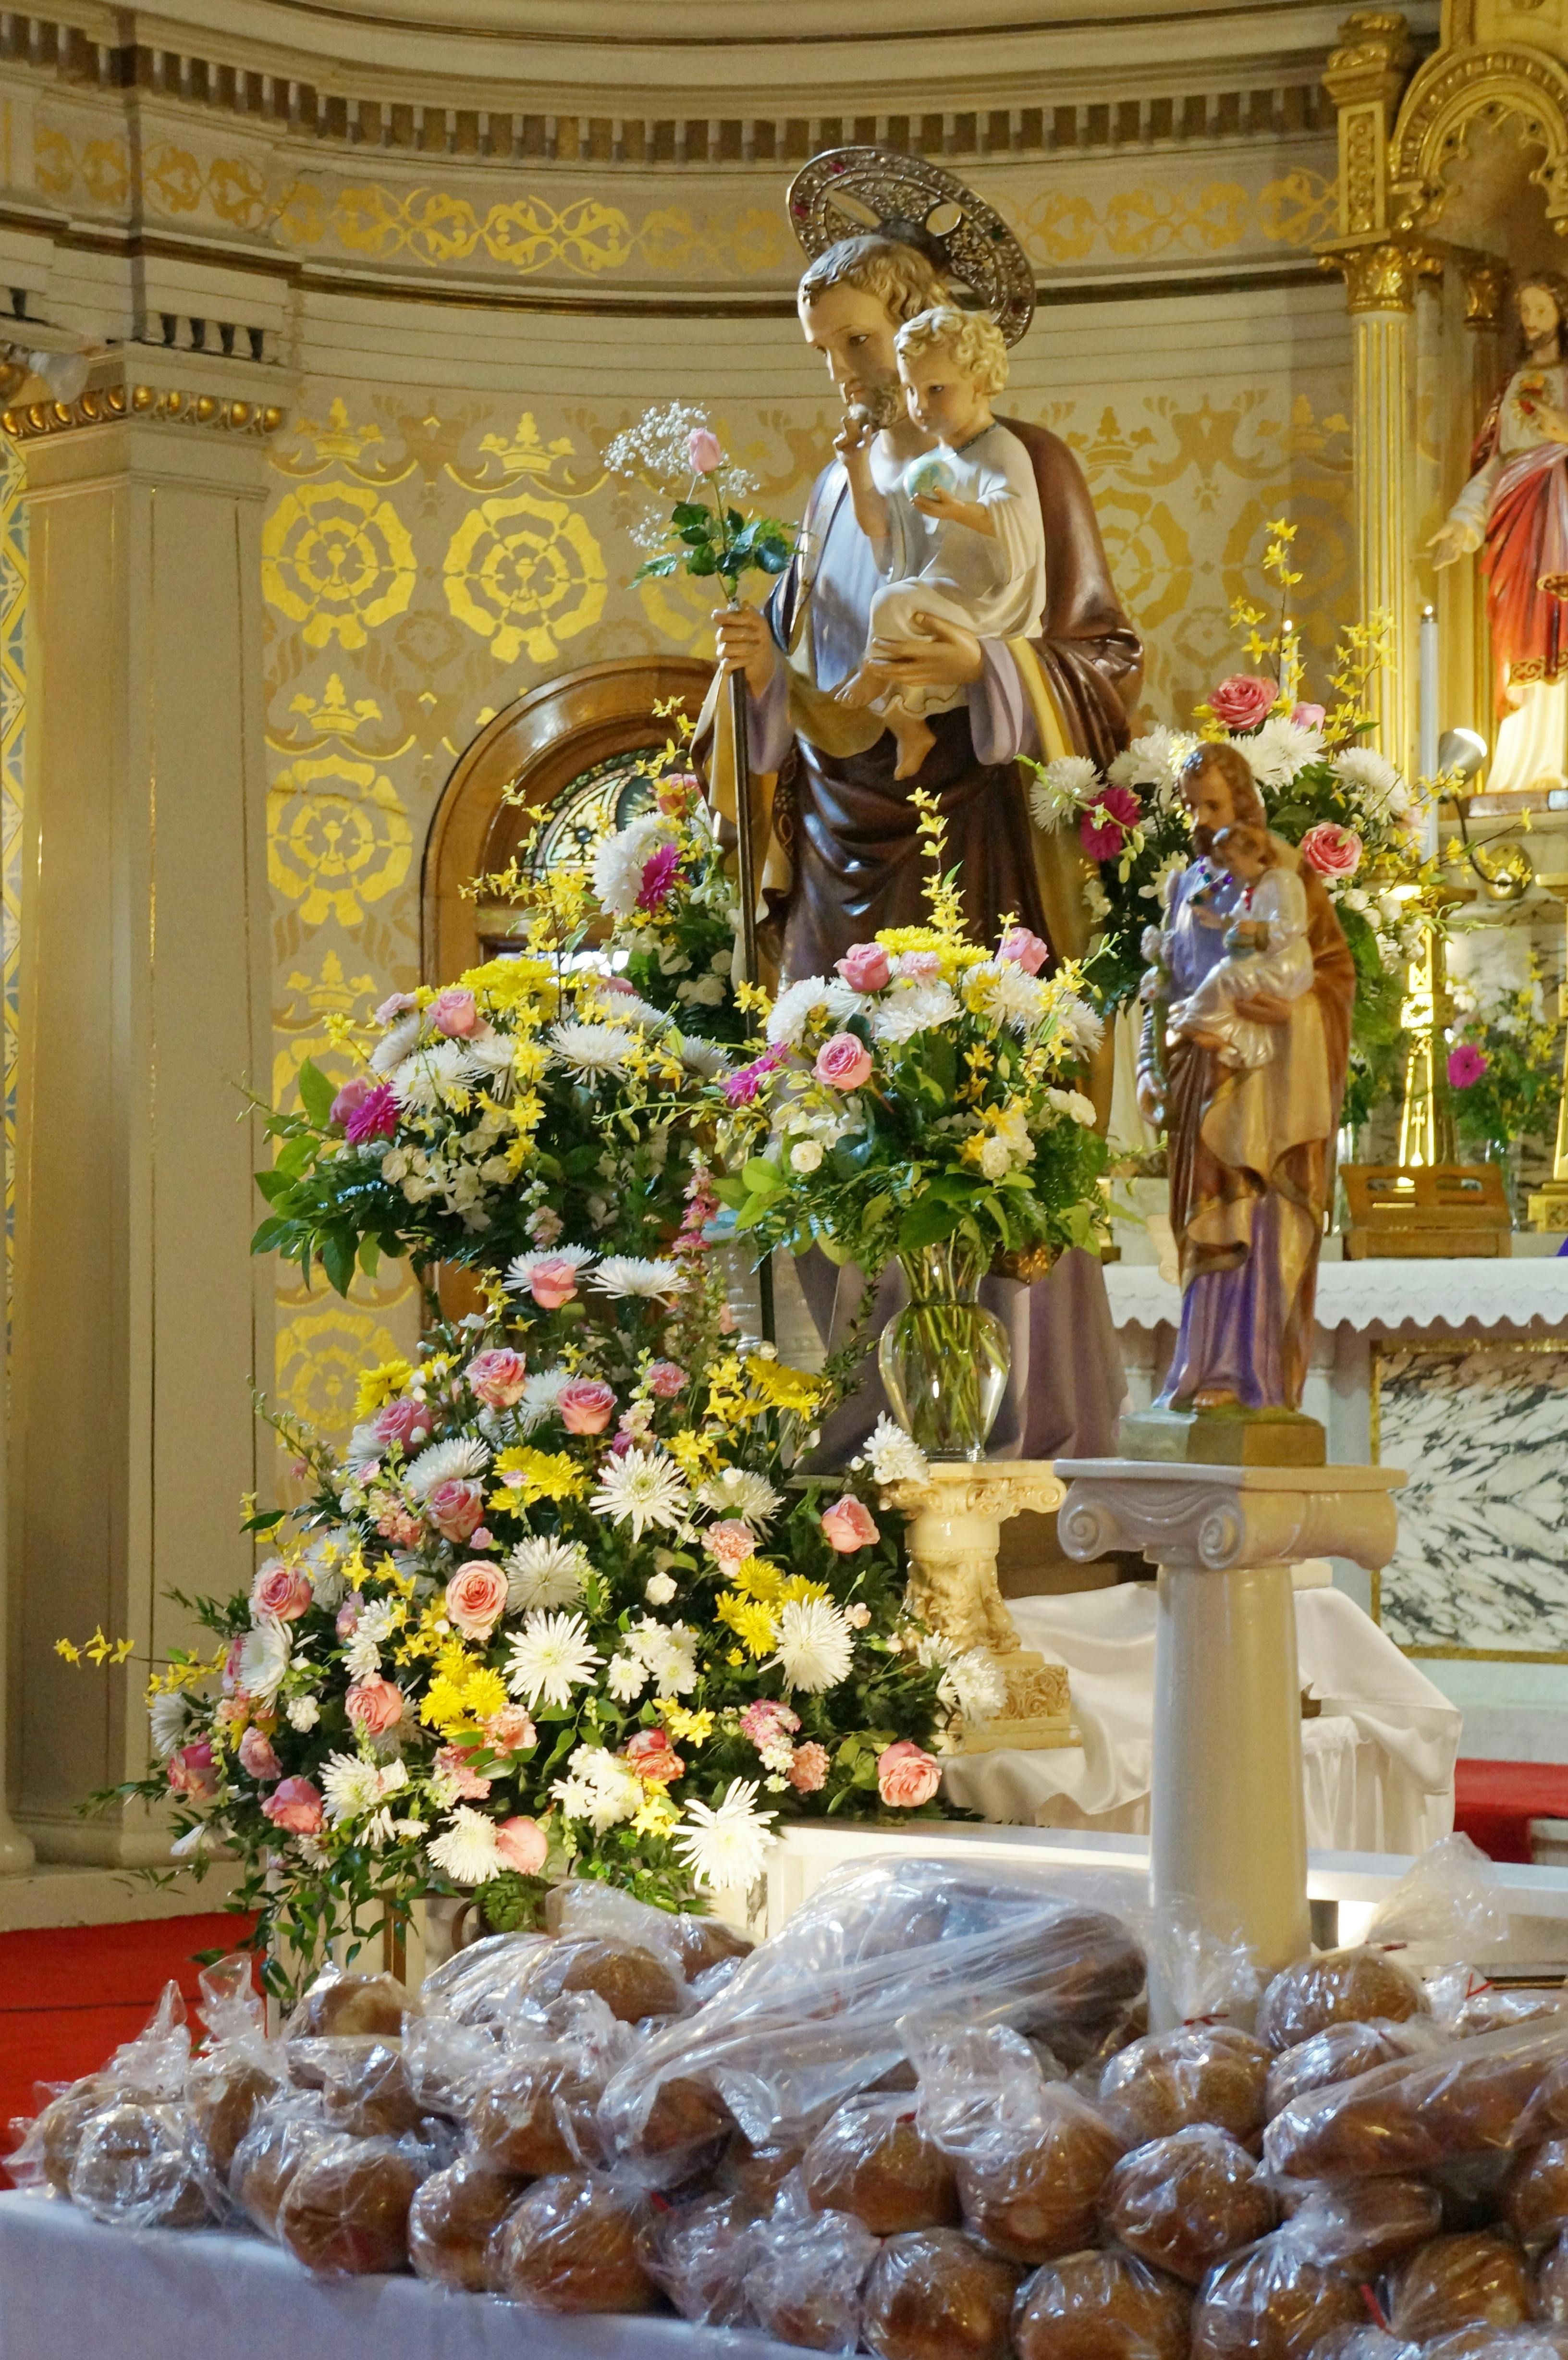 Tradition places the origin of the St. Joseph's Day table, or altar, during the Middle Ages, when local Sicilians prayed to the foster father of Jesus to end a drought. Centuries later, etiquette dictates that no one can be turned away from St. Joseph's table, in recognition of God's providence for all through the foster father of Jesus.